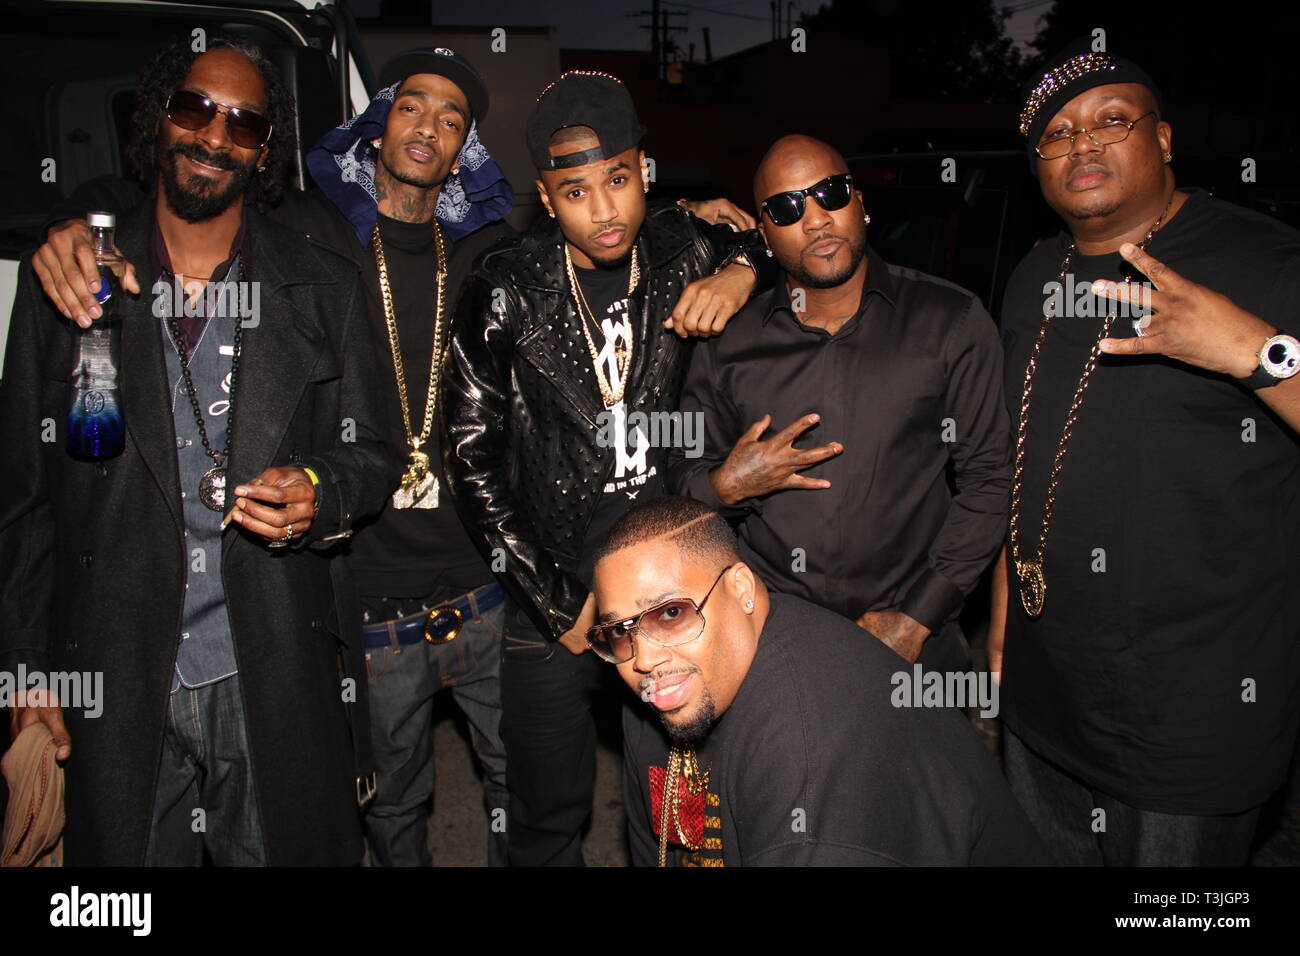 West Hollywood, Ca. 11th Feb, 2019. 2 Chainz, Snoop Dogg, Nipsey Hussle, Trey Songz, Young Jeezy, E-40 & L. Hutton on the set of the Young Jeezy 'R.I.P.' Video Shoot at Greystone Manor February 11, 2013 in West Hollywood, California. Credit: Walik Goshorn/Mediapunch/Alamy Live News Stock Photo